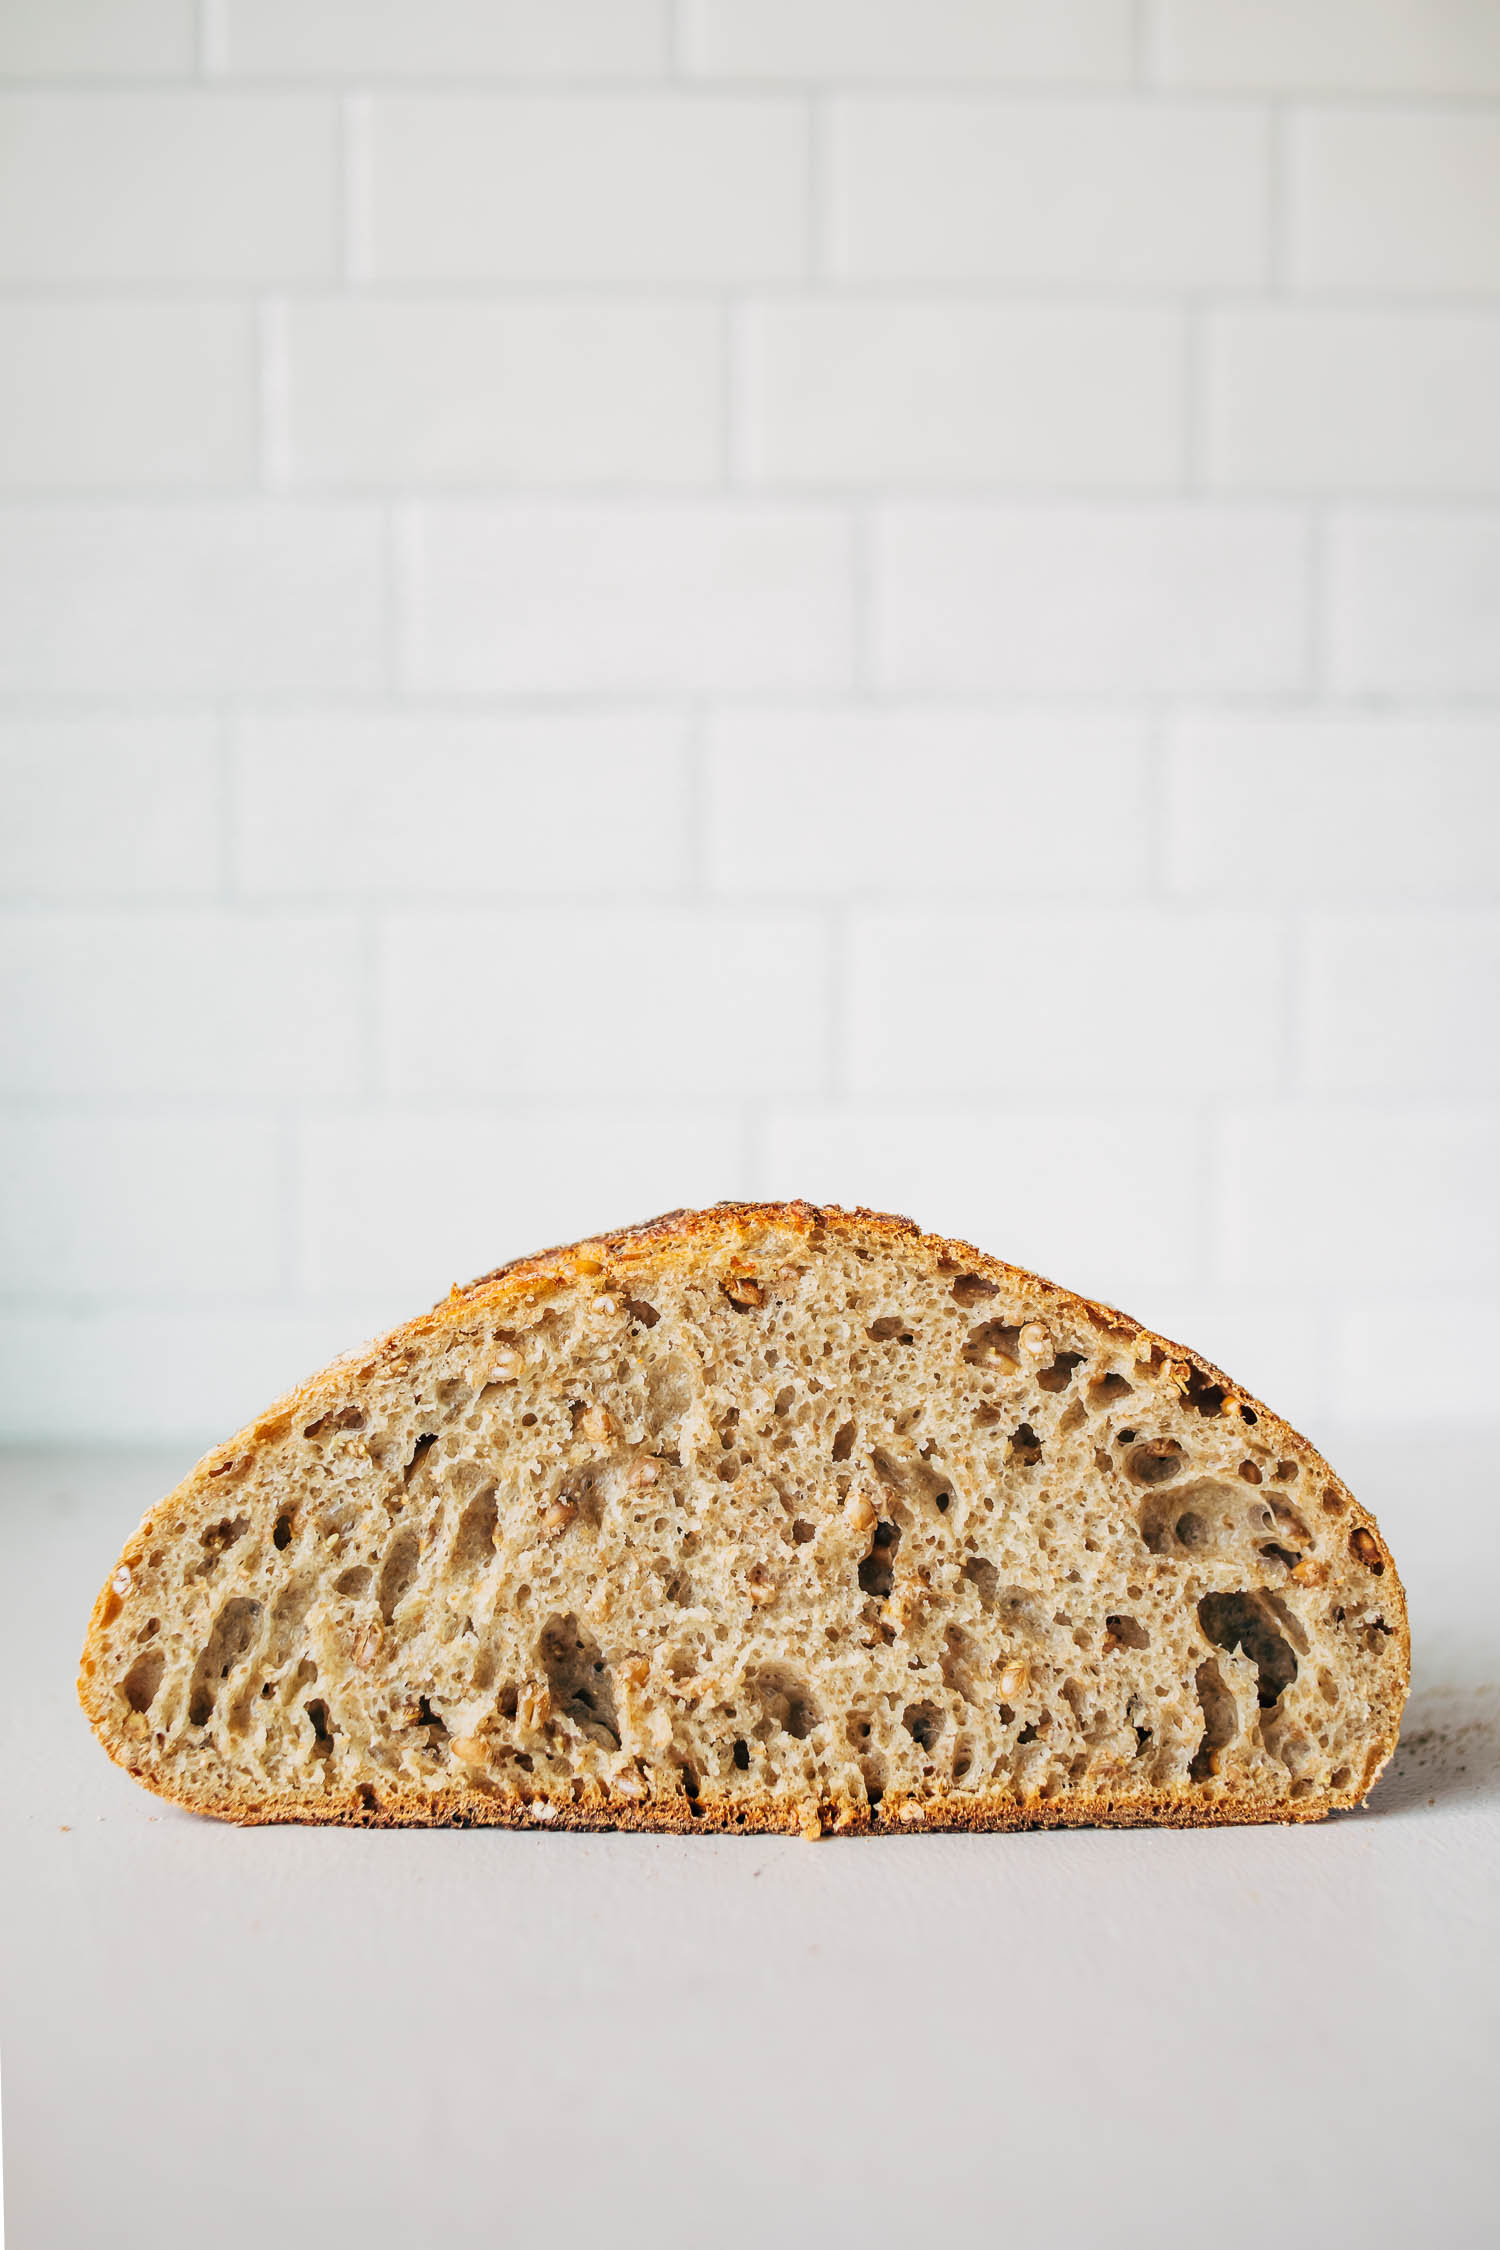 Cross section of bread to show interior crumb.